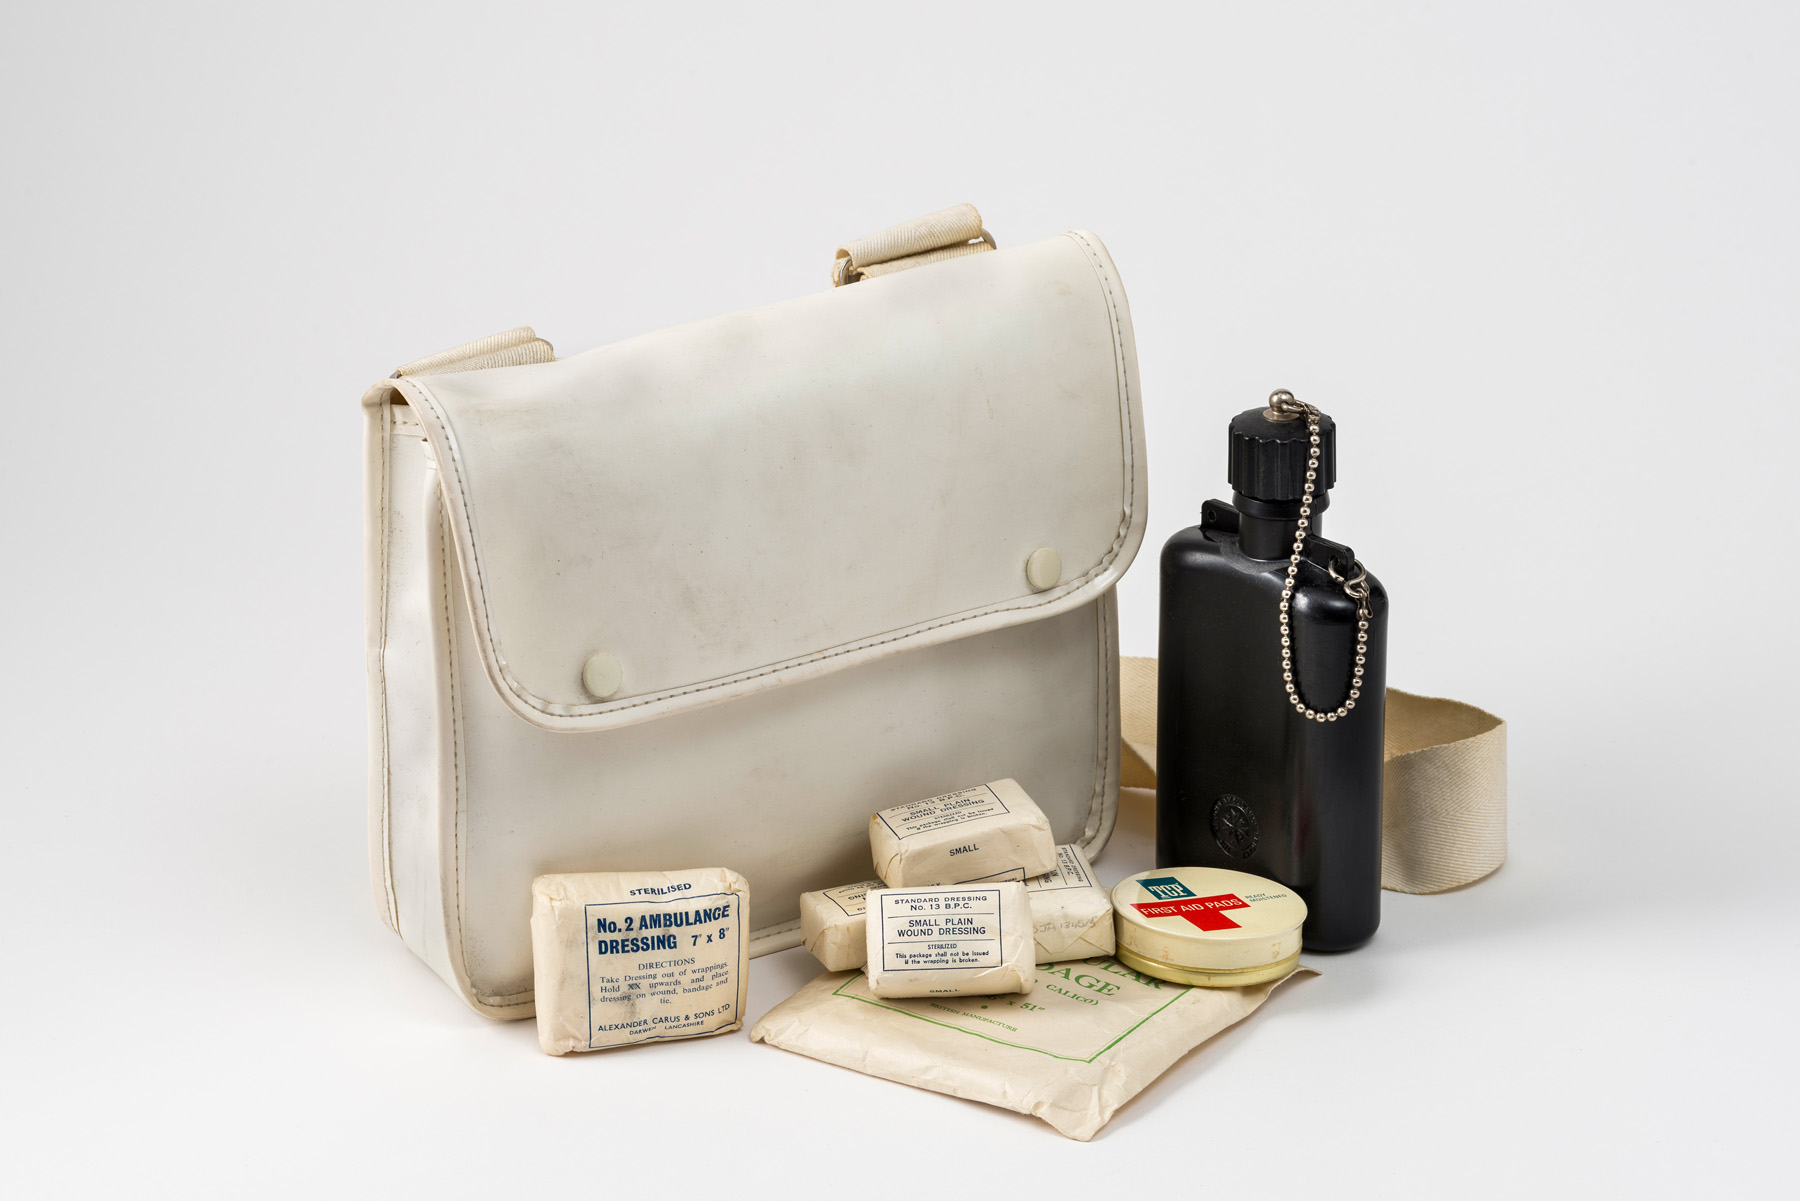 White rectangular shaped bag with two white poppers and a white canvas strap. The photograph shows the contents of the bag on display including a black plastic water bottle and various dressings and bandages.